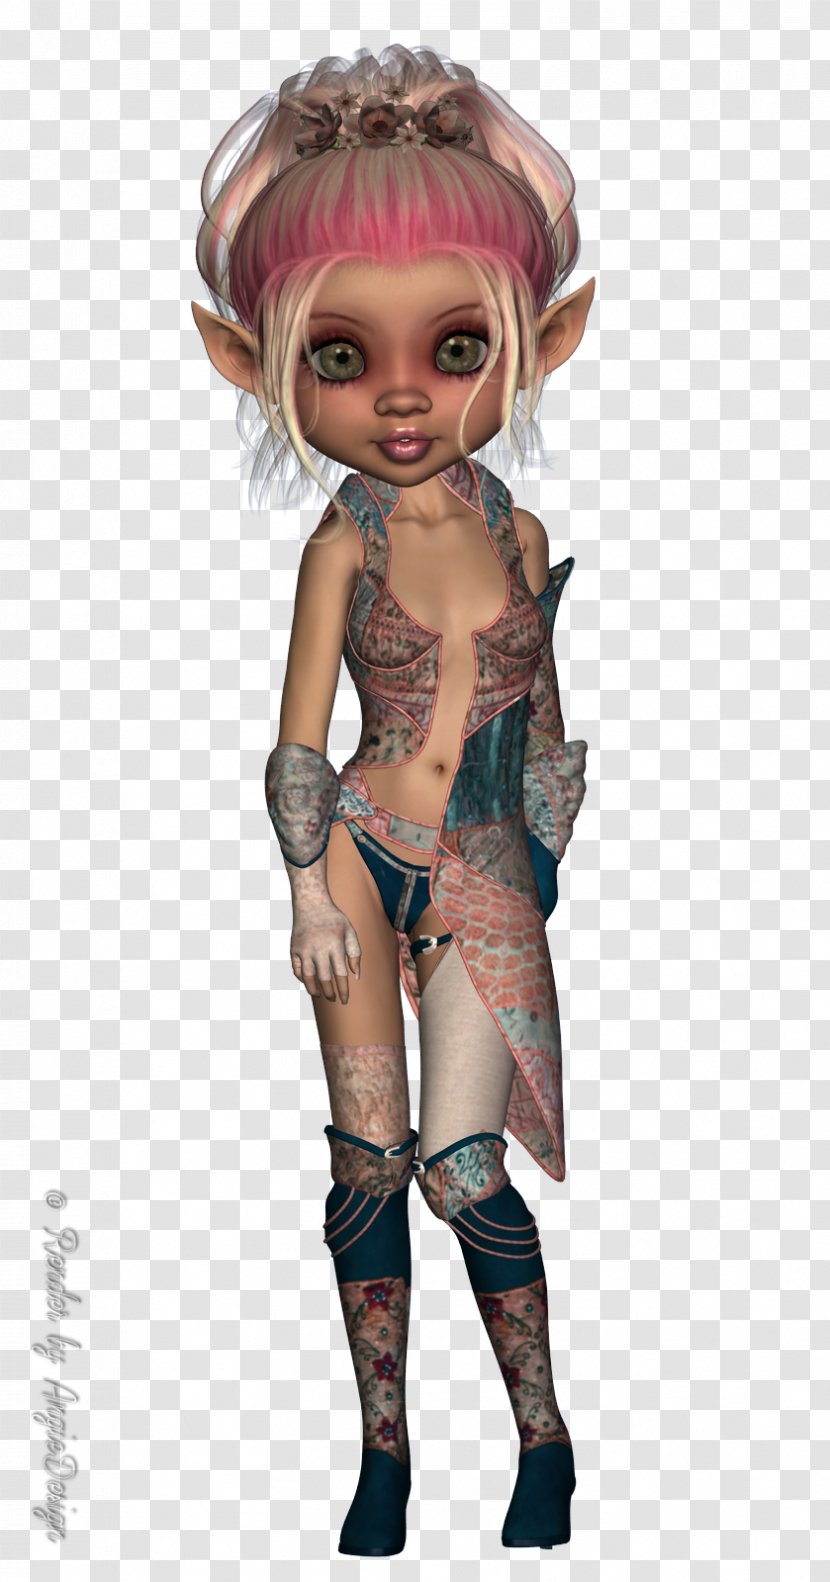 Brown Hair Doll Legendary Creature - Mythical Transparent PNG